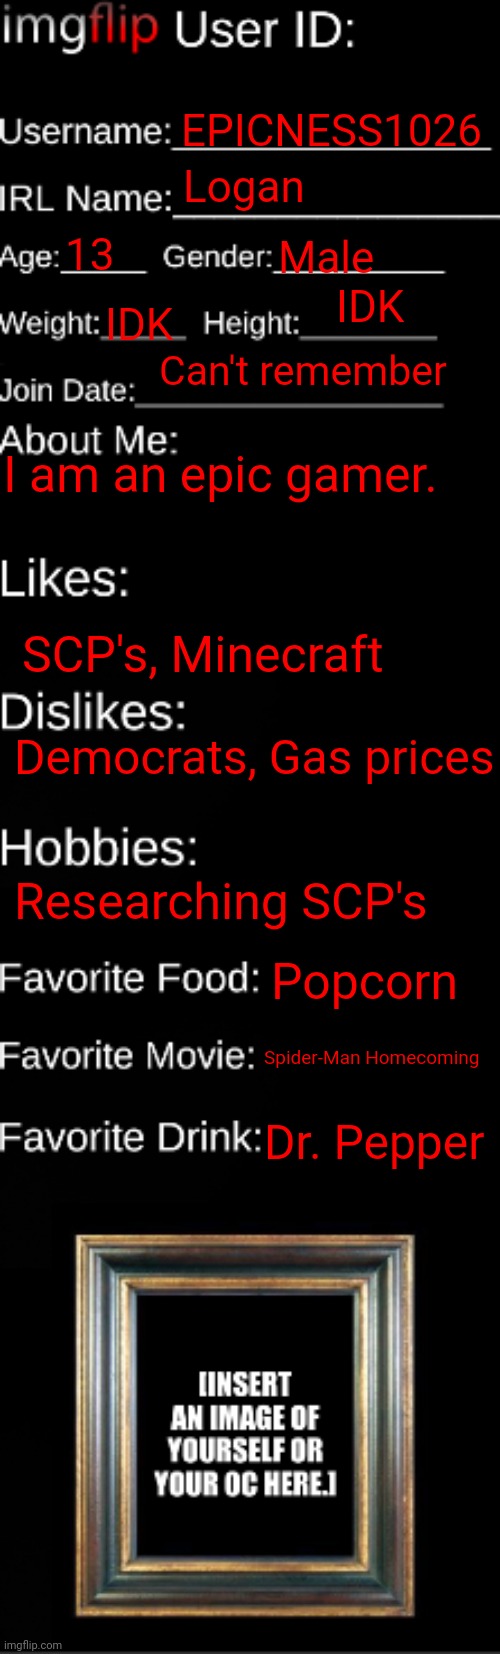 All About Me! | EPICNESS1026; Logan; 13; Male; IDK; IDK; Can't remember; I am an epic gamer. SCP's, Minecraft; Democrats, Gas prices; Researching SCP's; Popcorn; Spider-Man Homecoming; Dr. Pepper | image tagged in imgflip id card,why are you reading this,quit,i said stop,stop reading the tags | made w/ Imgflip meme maker